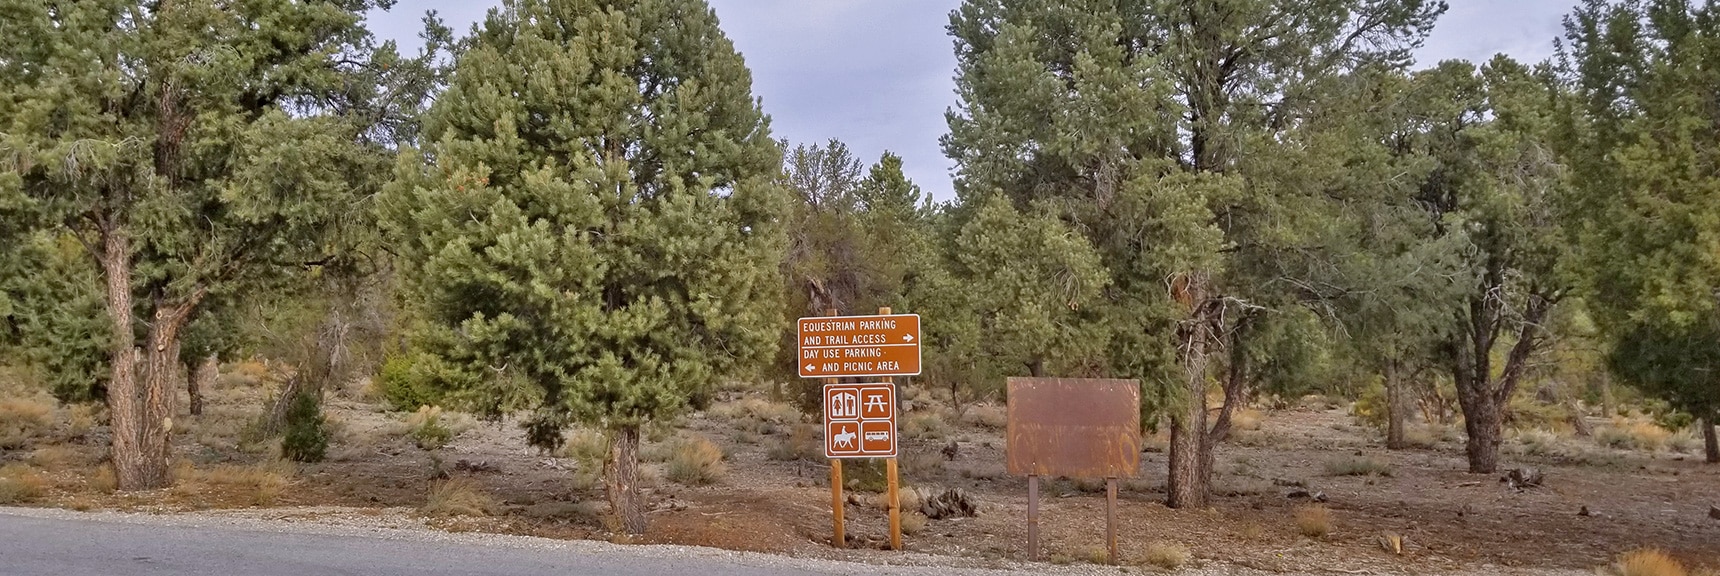 Left Turn to Hiker's Trailhead Parking Area for Sawmill Loop Trail | Sawmill Trail to McFarland Peak | Spring Mountains, Nevada